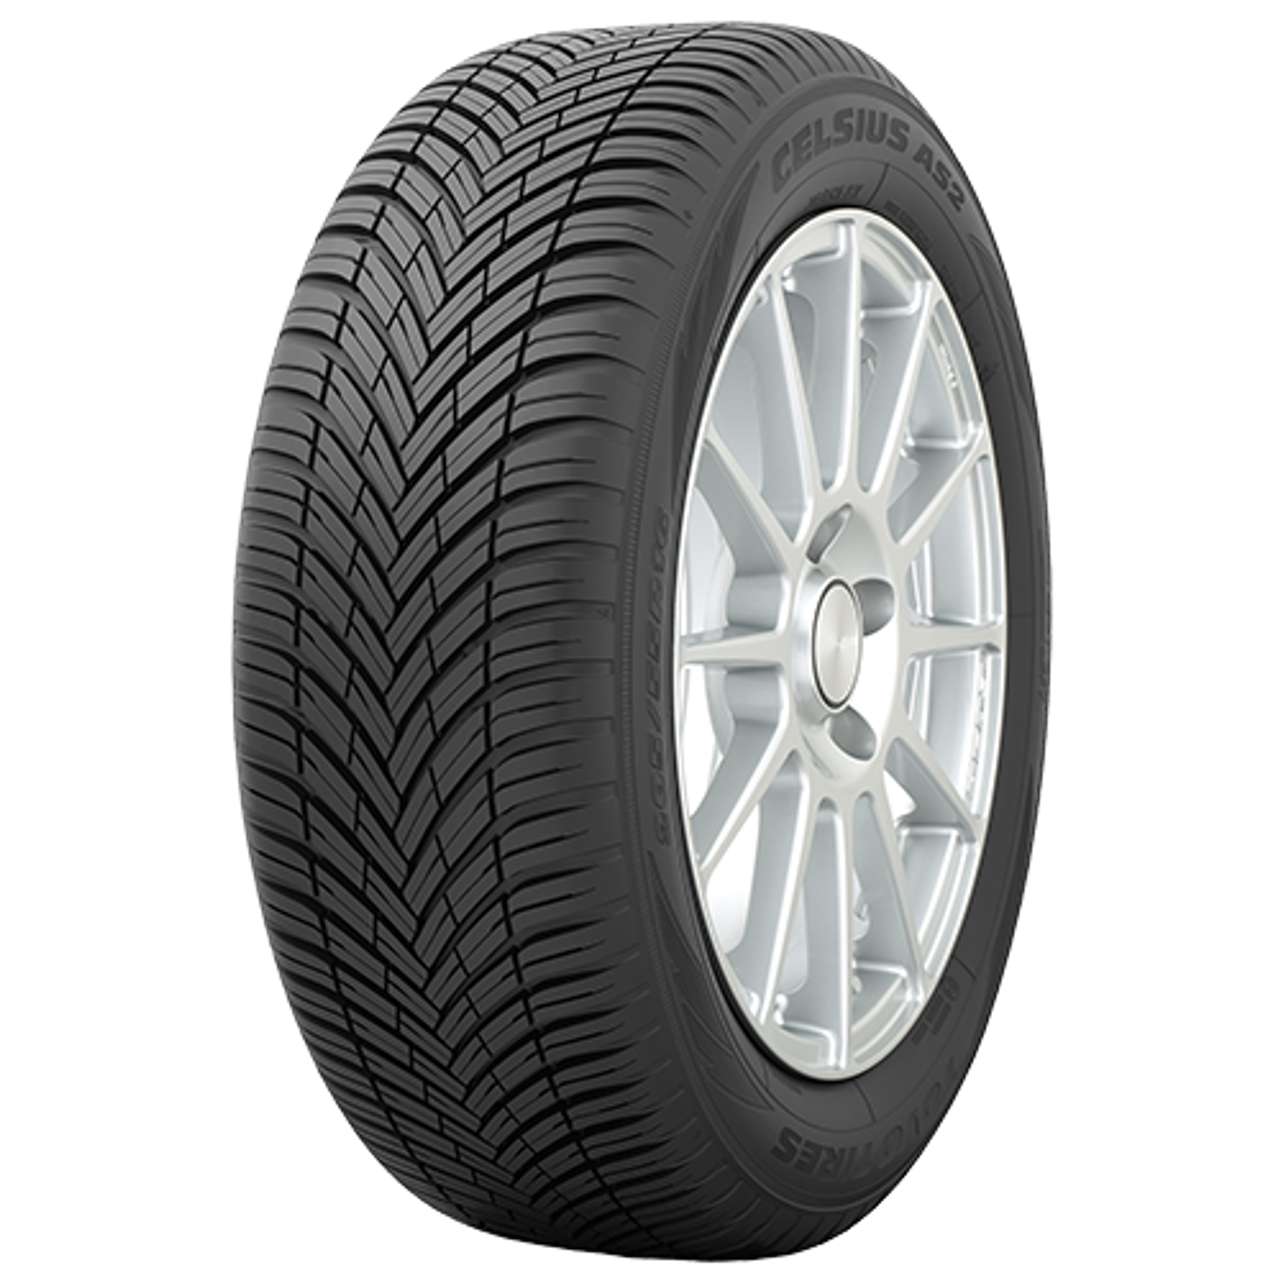 TOYO CELSIUS AS2 215/60R16 99V BSW